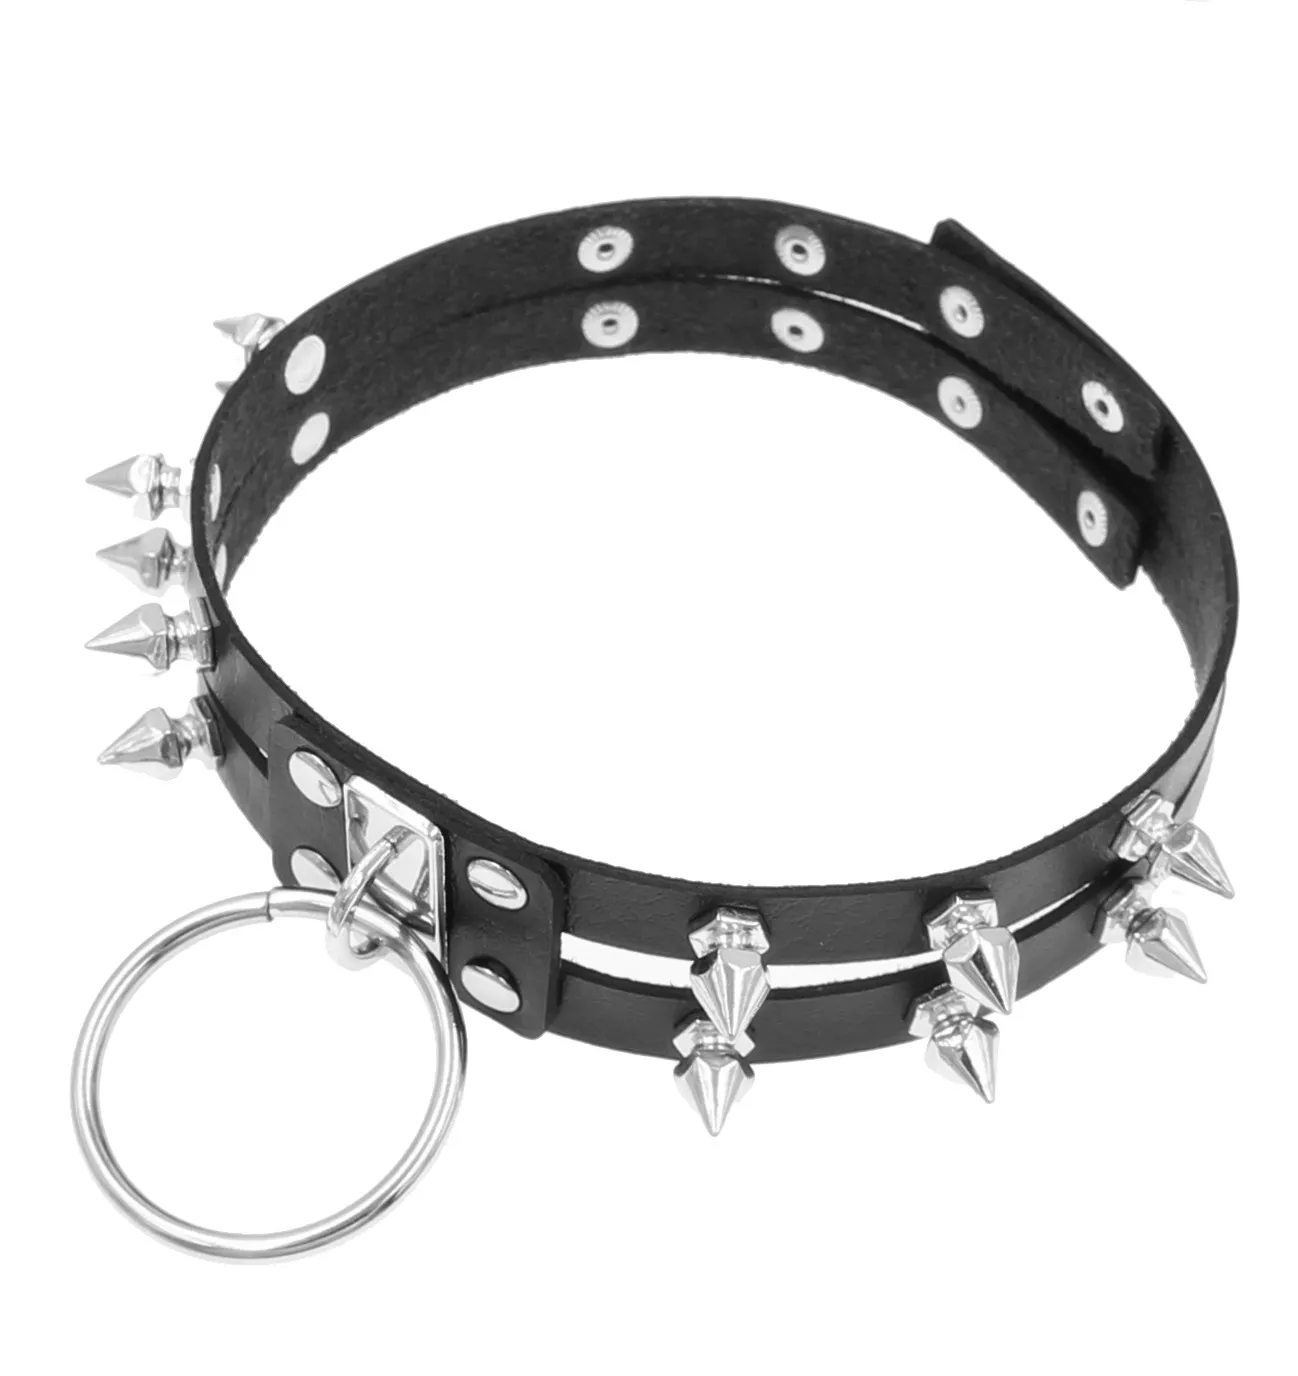 Chokers Gothic Black Spiked Punk Choker Collar Spikes Rivets Studded Chocker Necklace For Women Men Bondage Cosplay Goth Je Dhgarden Dhlyi